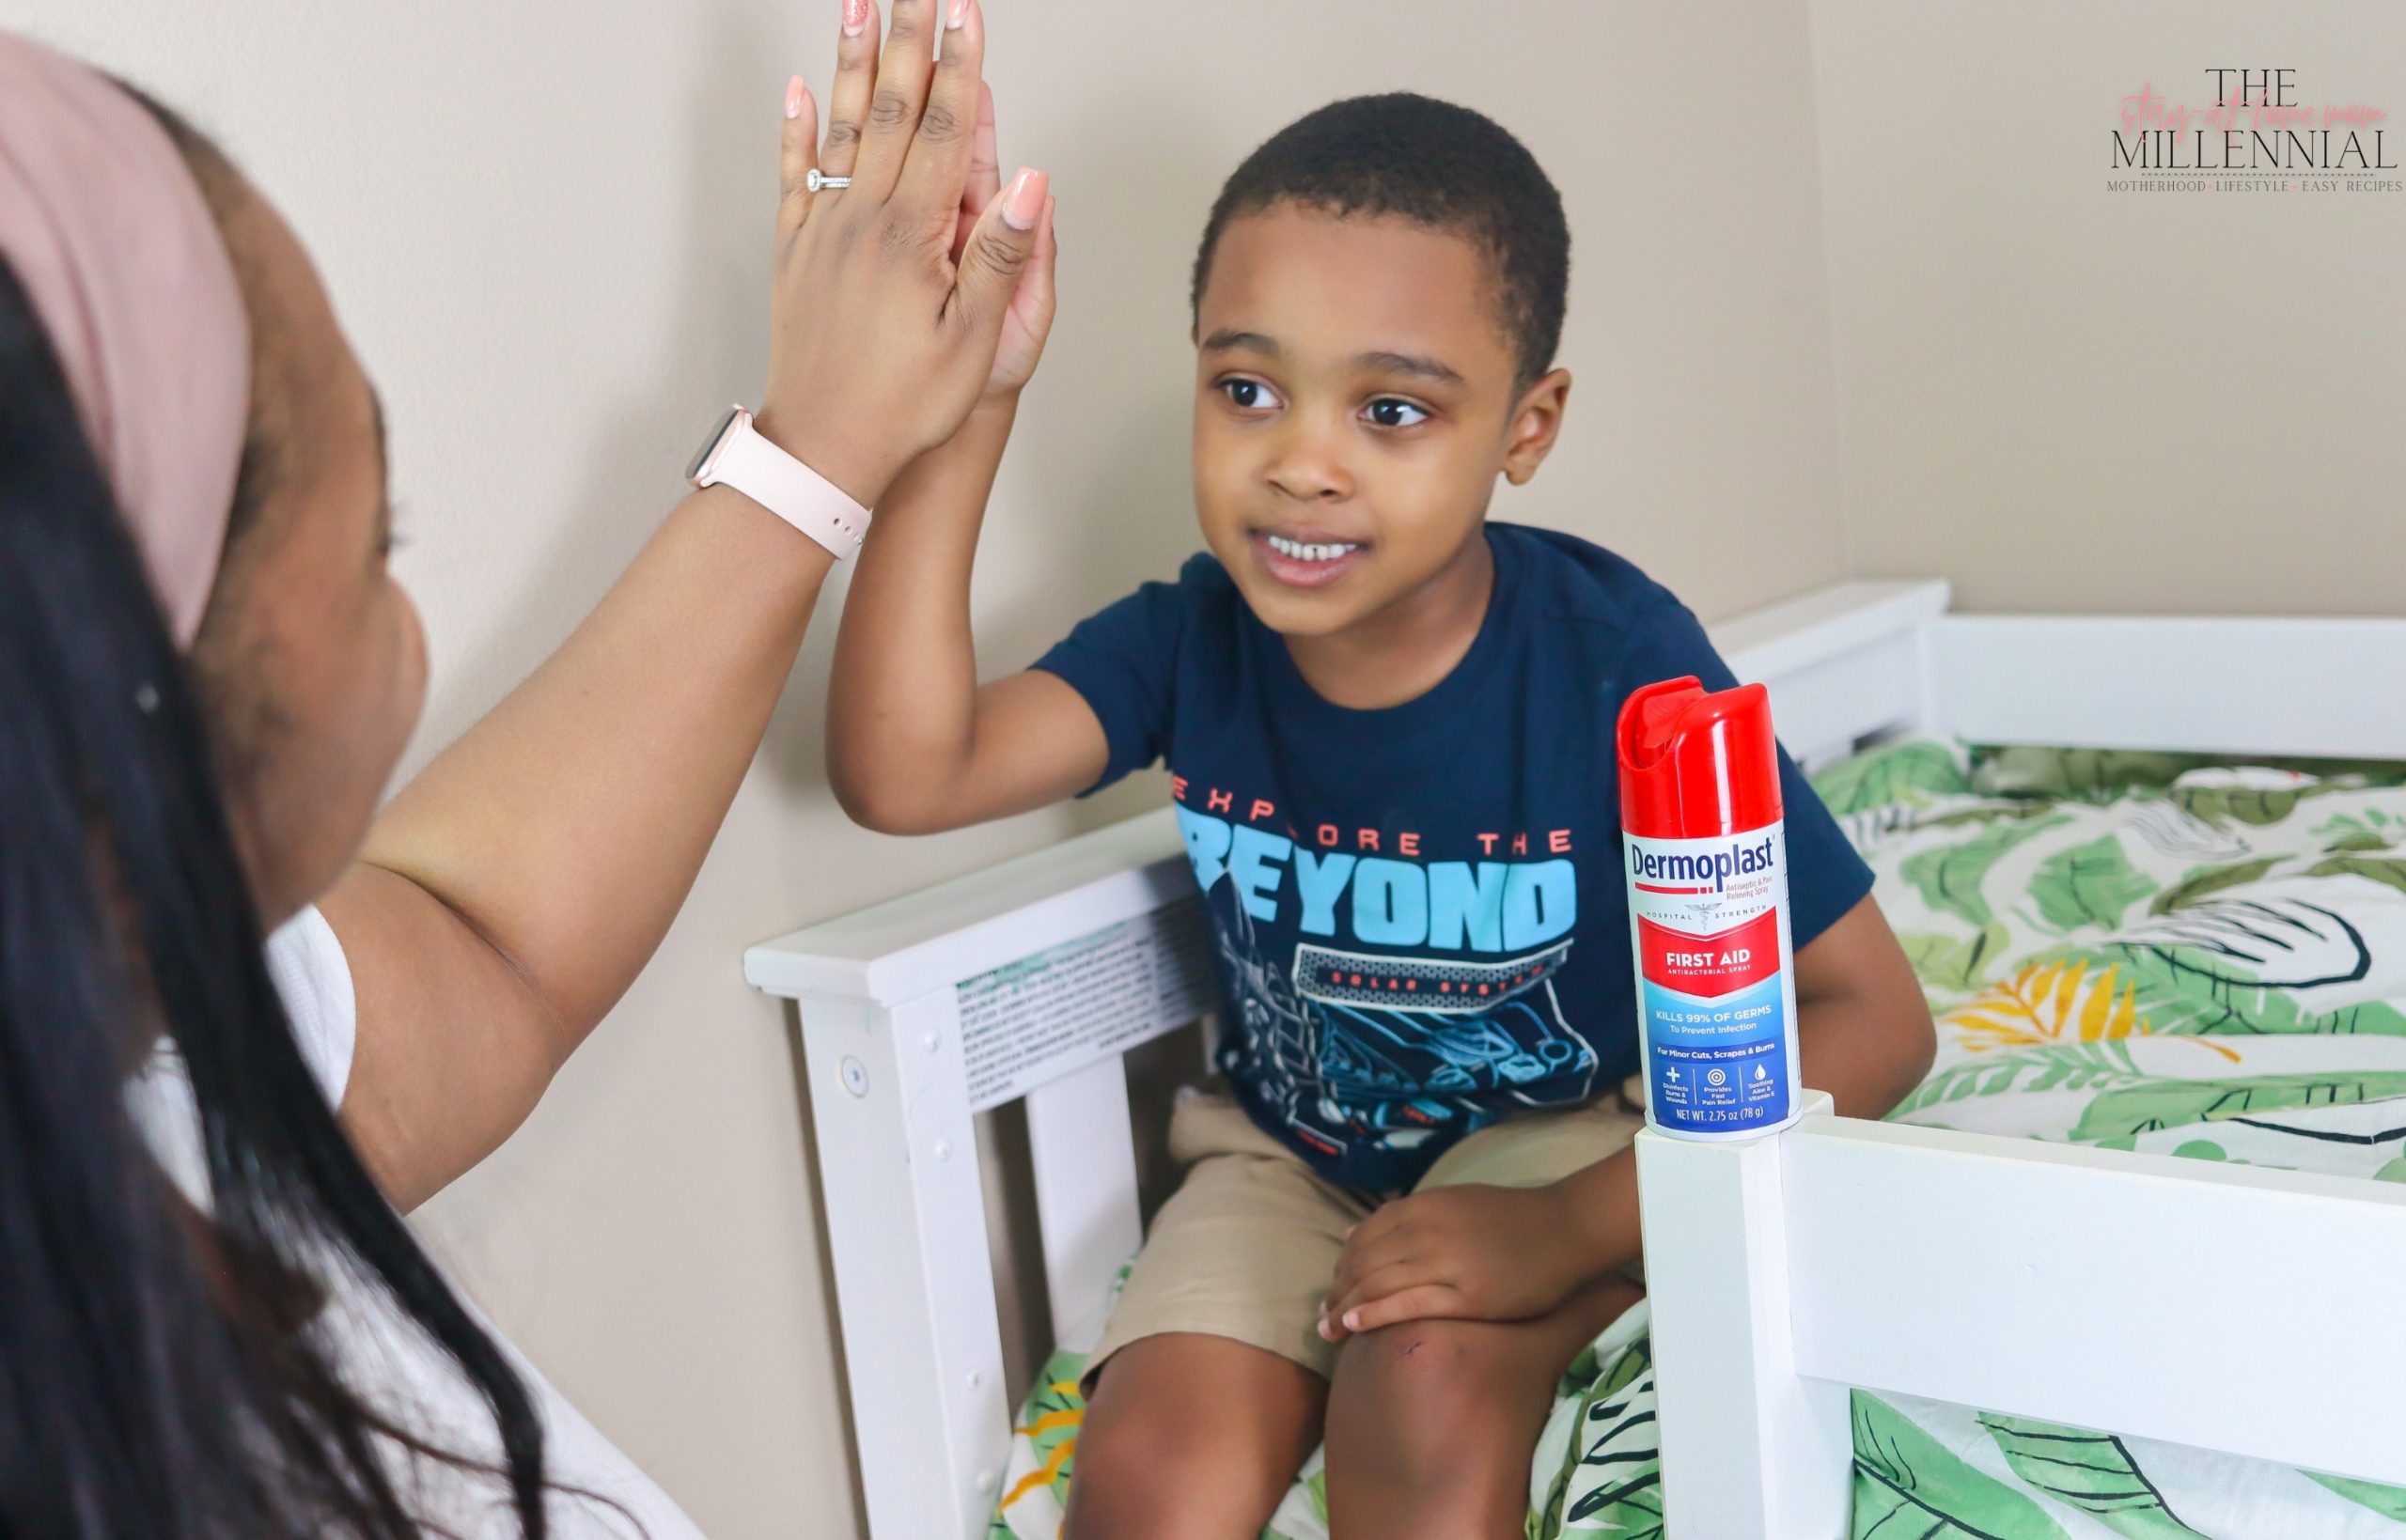 My super simple First Aid Routine For Everyday Boo Boo’s is perfect for those everyday cuts and scrapes that are bound to happen.